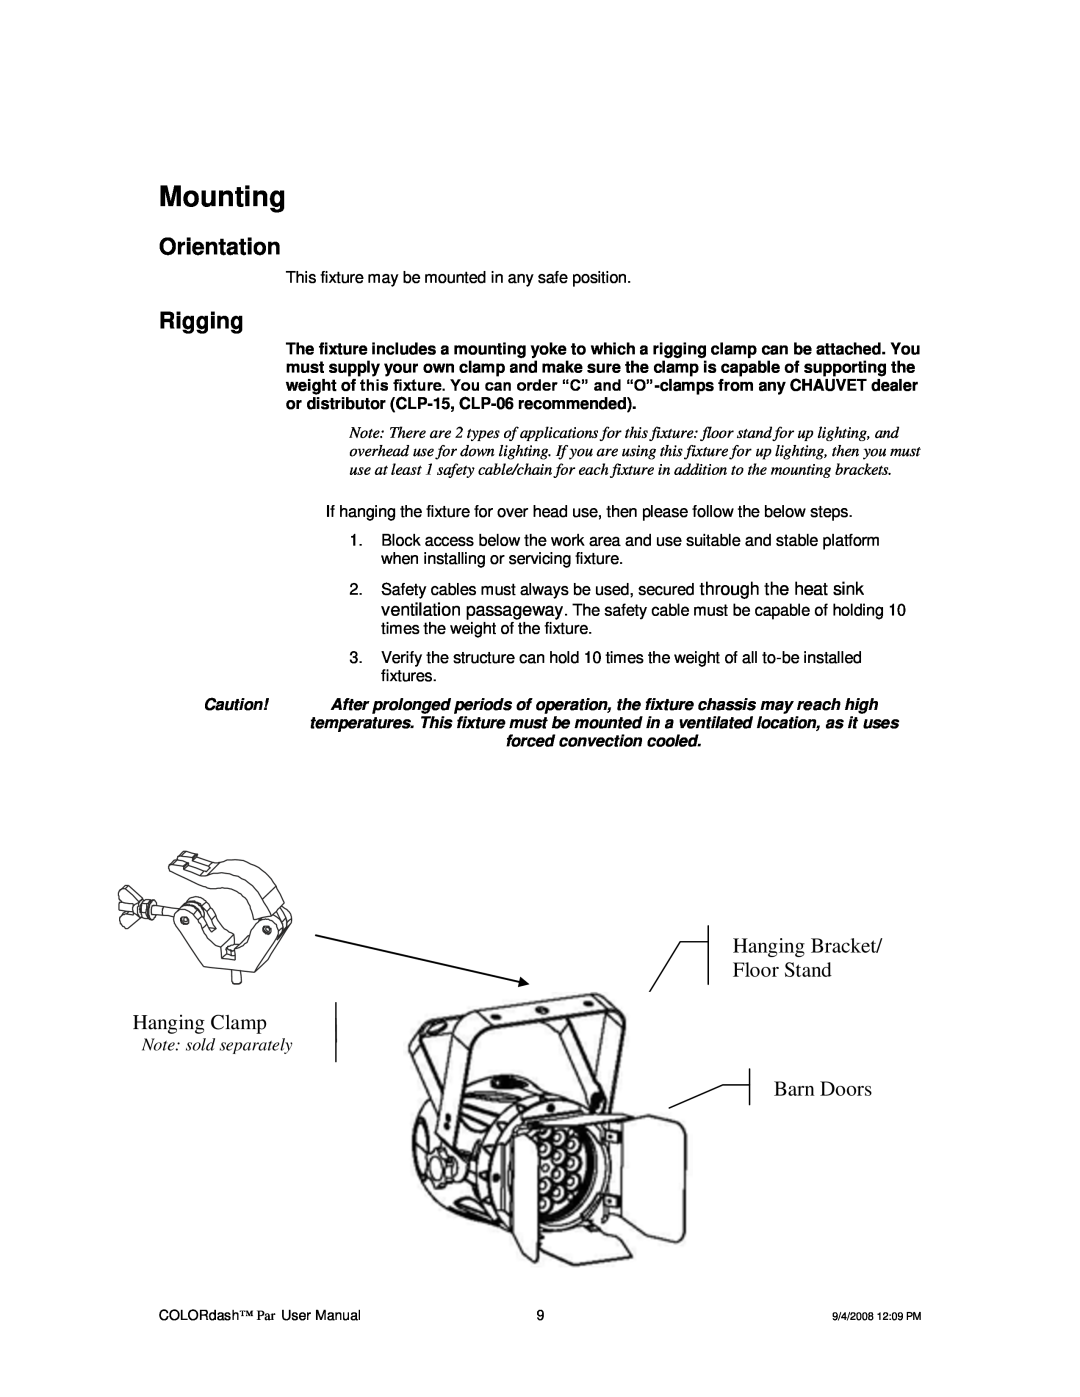 Chauvet DMX512 user manual Mounting, Orientation, Rigging, Note sold separately 